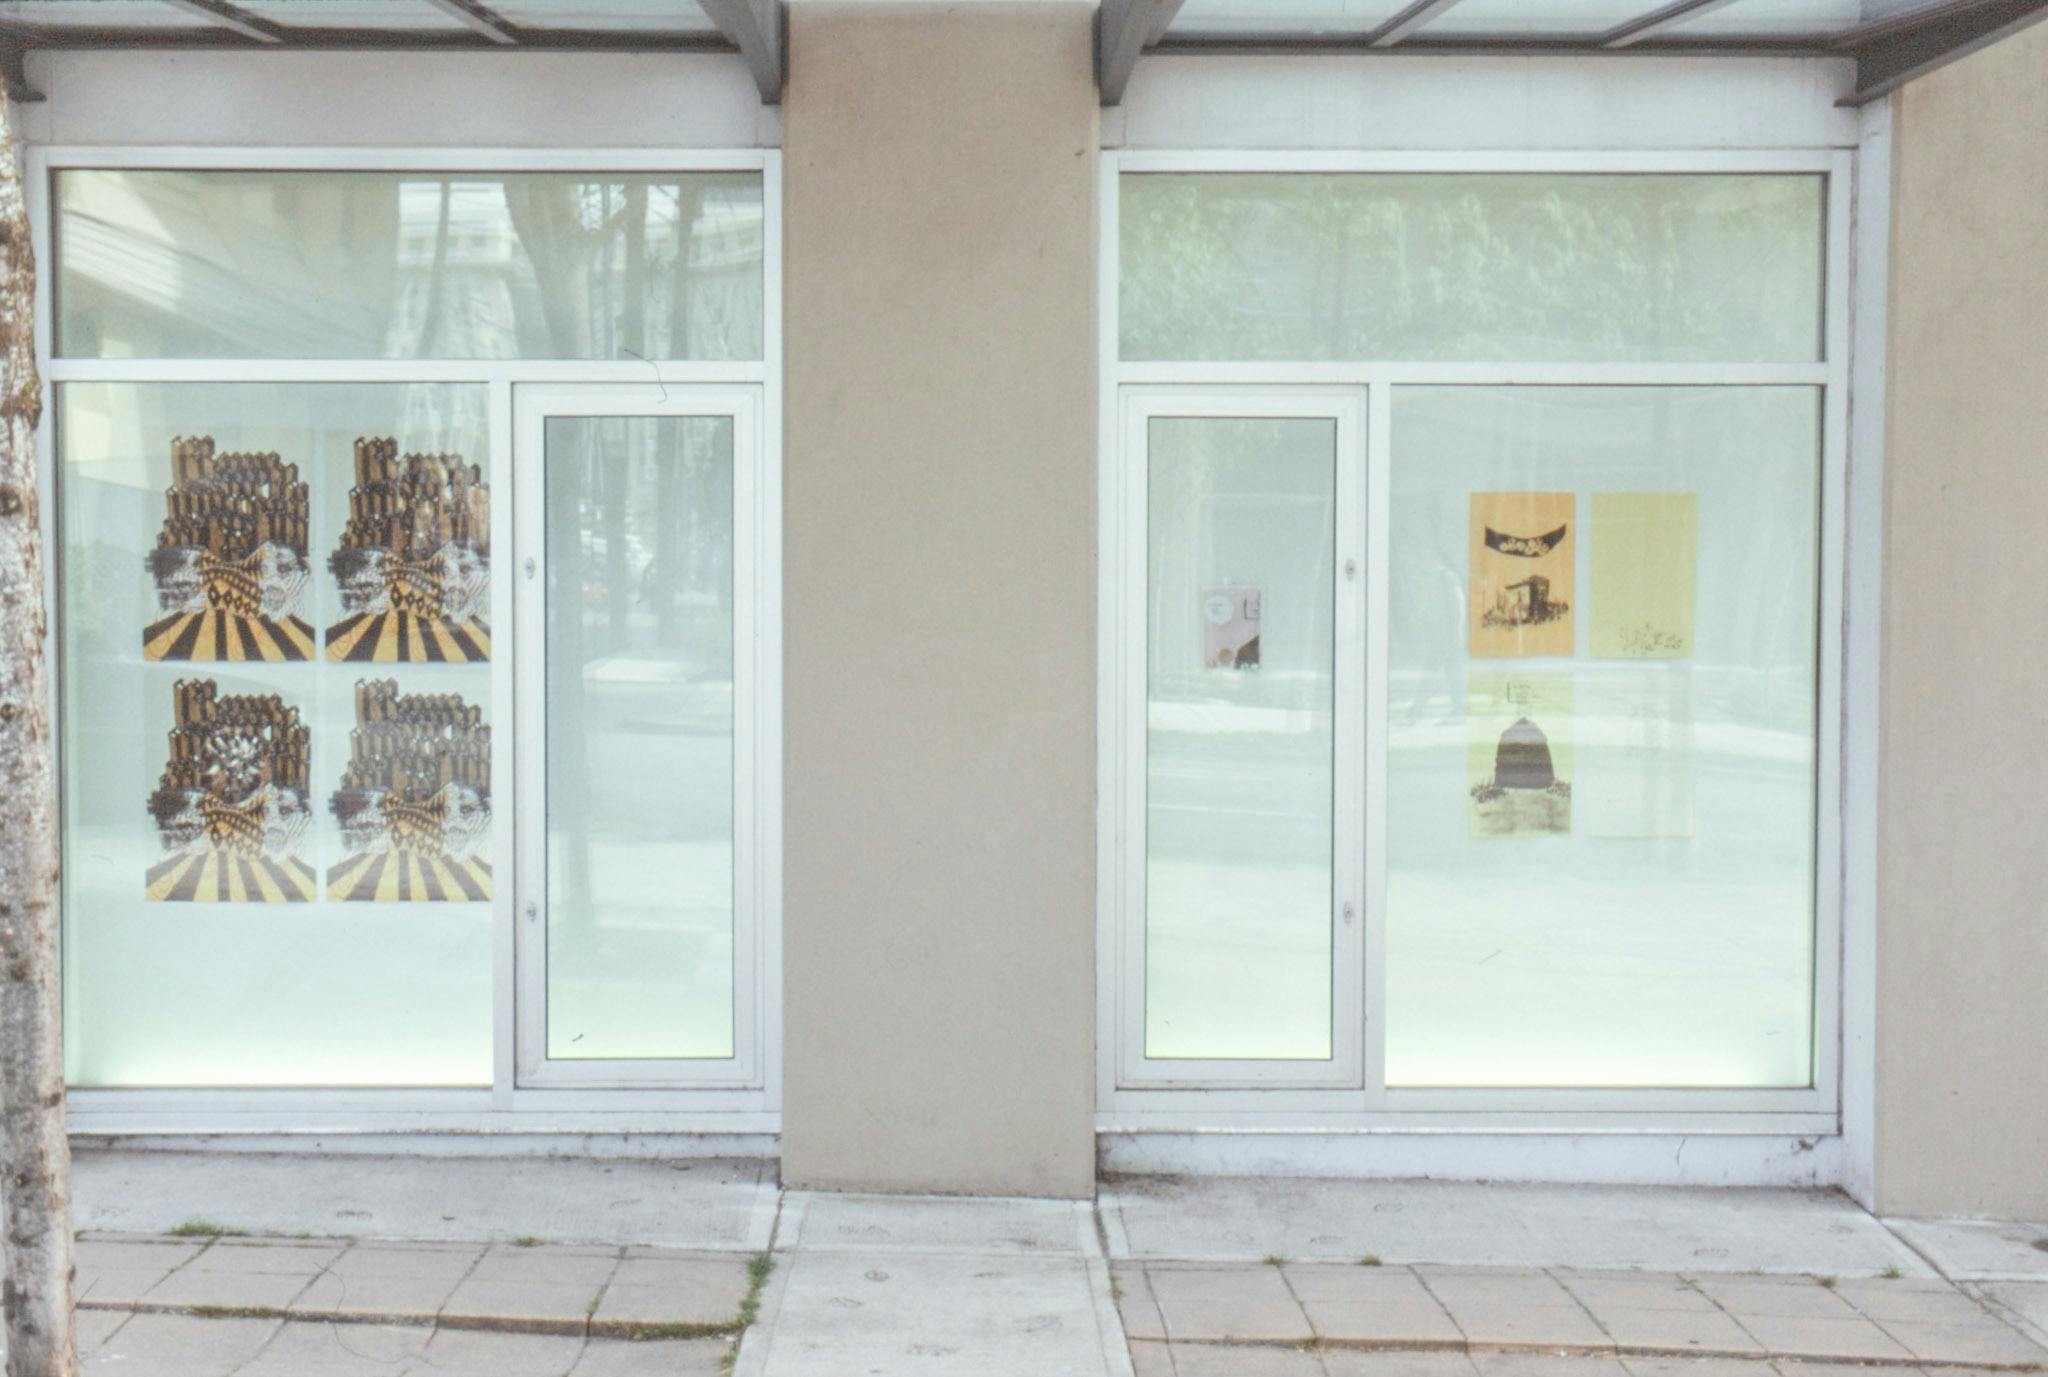 An install image of two-dimensional works in CAG’s window spaces facing Nelson Street. Exhibited works look like a collection of various ephemera such as posters and pamphlets.